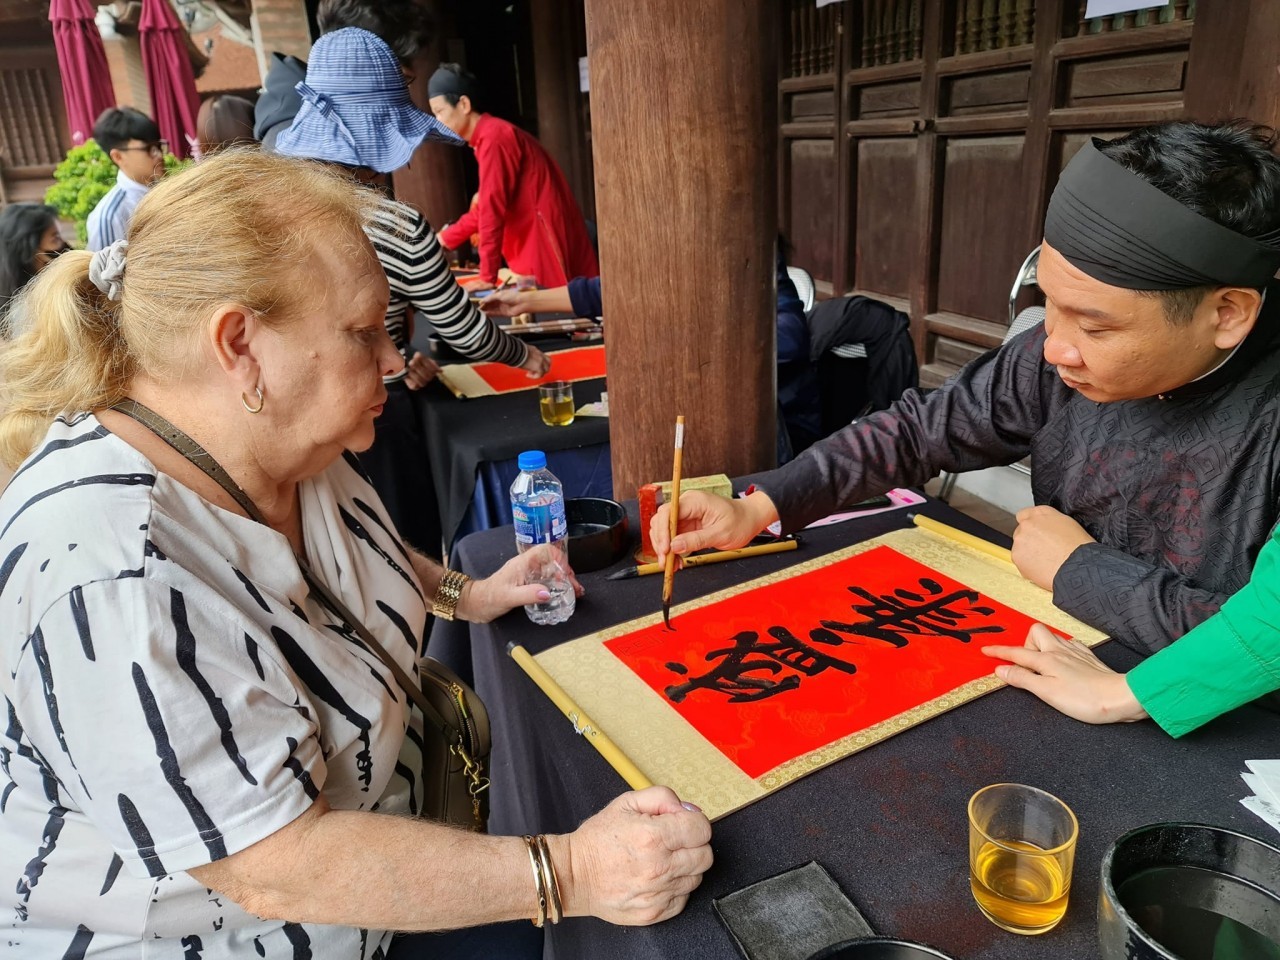 Intl' Tourists Ask for Calligraphic Works at Temple of Literature